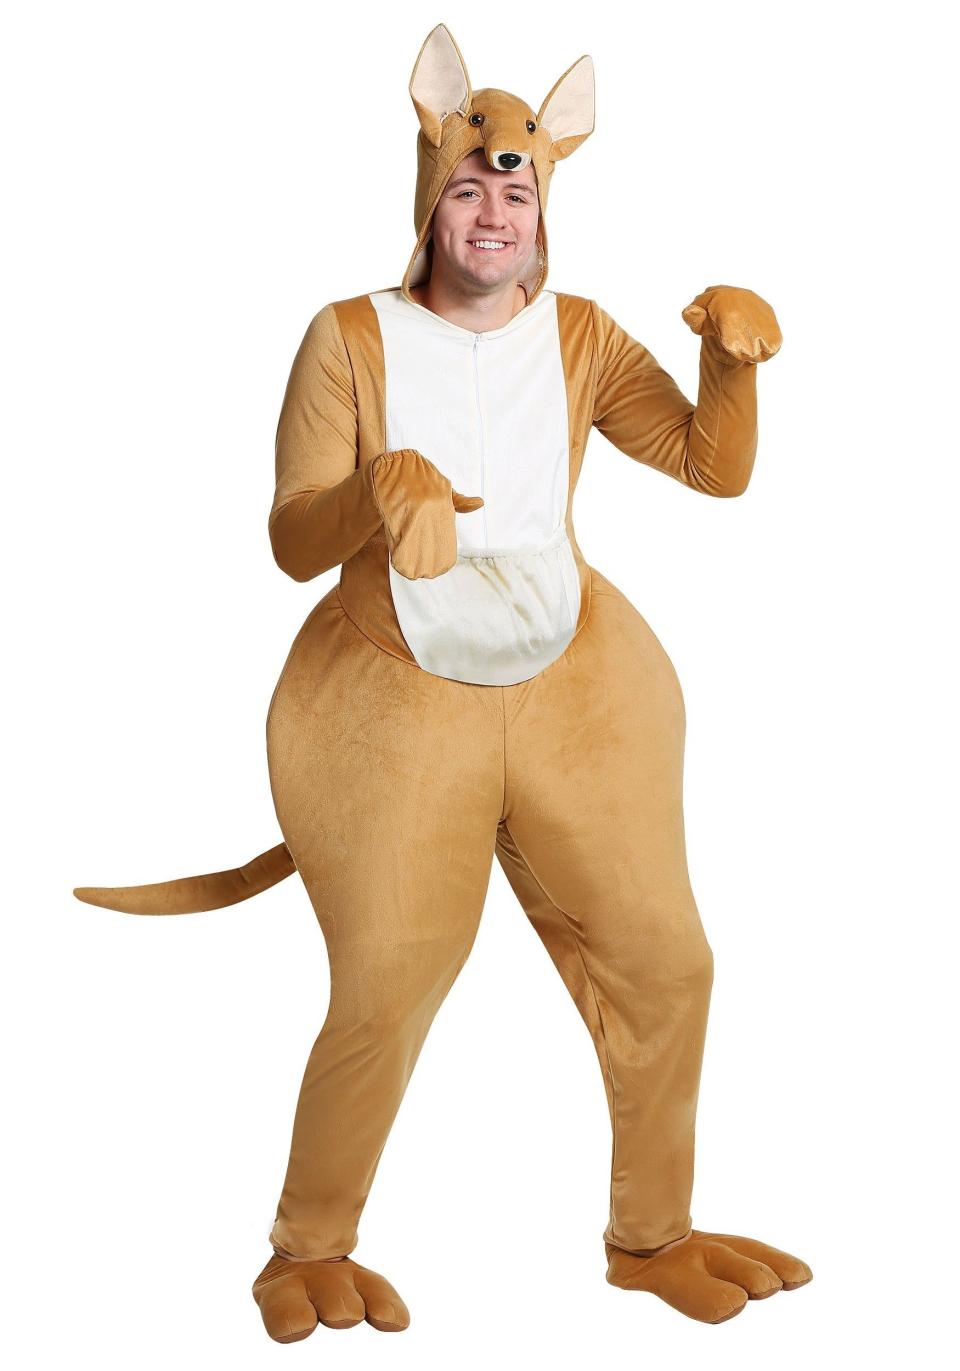 Yes, this <a href="https://www.halloweencostumes.com/kangaroo-adult-costume.html" target="_blank">kangaroo costume</a> is ridiculous and accentuates the badonkadonk in a manner some might find unflattering. But before you start hating, please note one thing: That there pouch is pretty decent for holding small amounts of contraband. We'll wait while you go online to order.